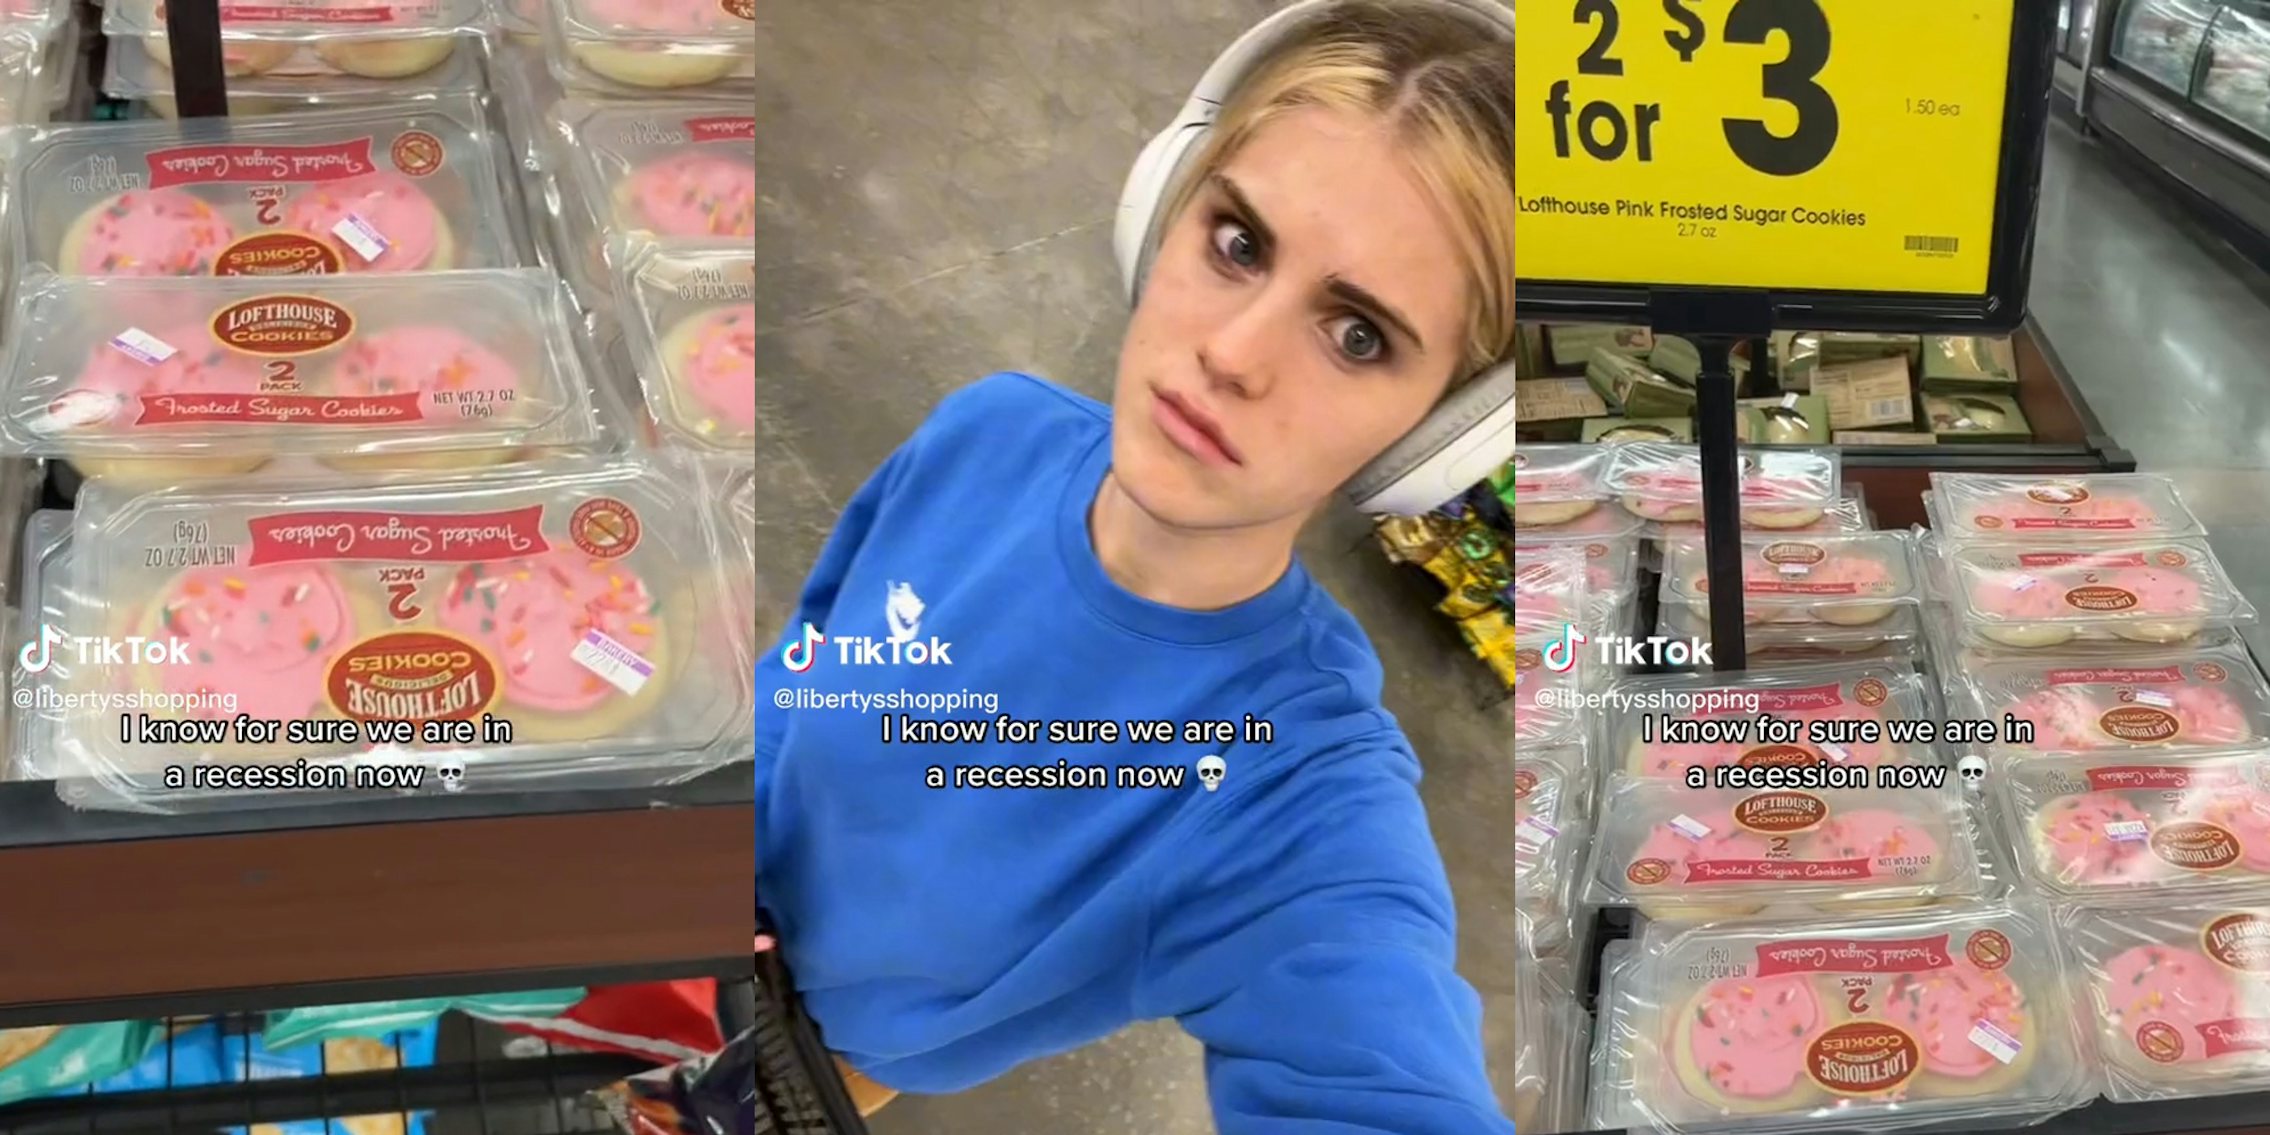 young woman with sugar cookies and caption 'I know for sure we are in a recession now'